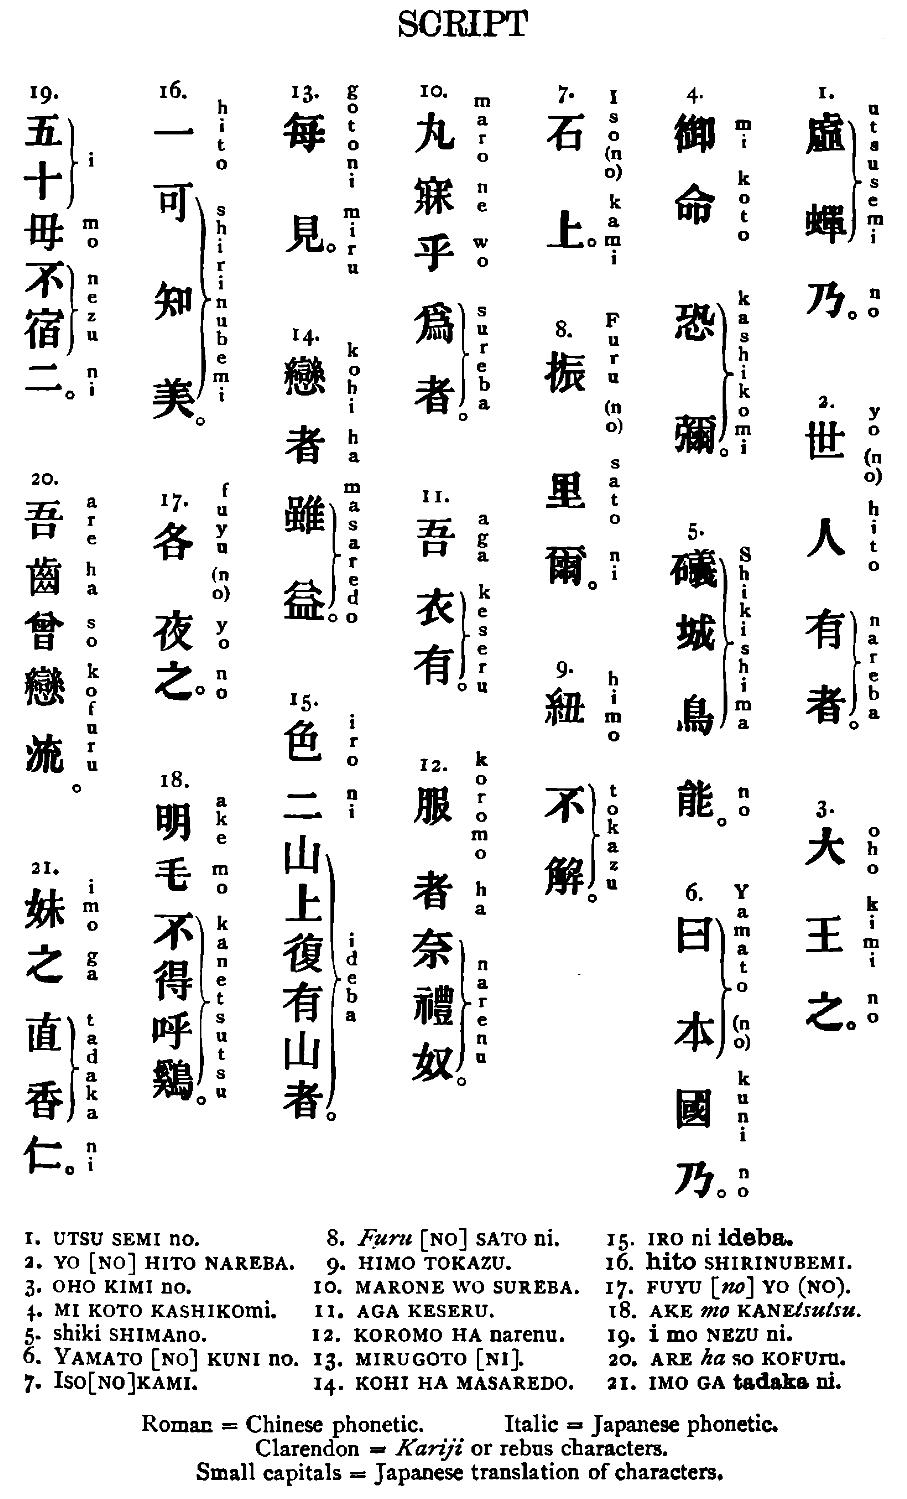 The Project Gutenberg eBook of Primitive & Mediaeval Japanese Texts  transliterated into Roman, by Frederick Victor Dickins, C.B..